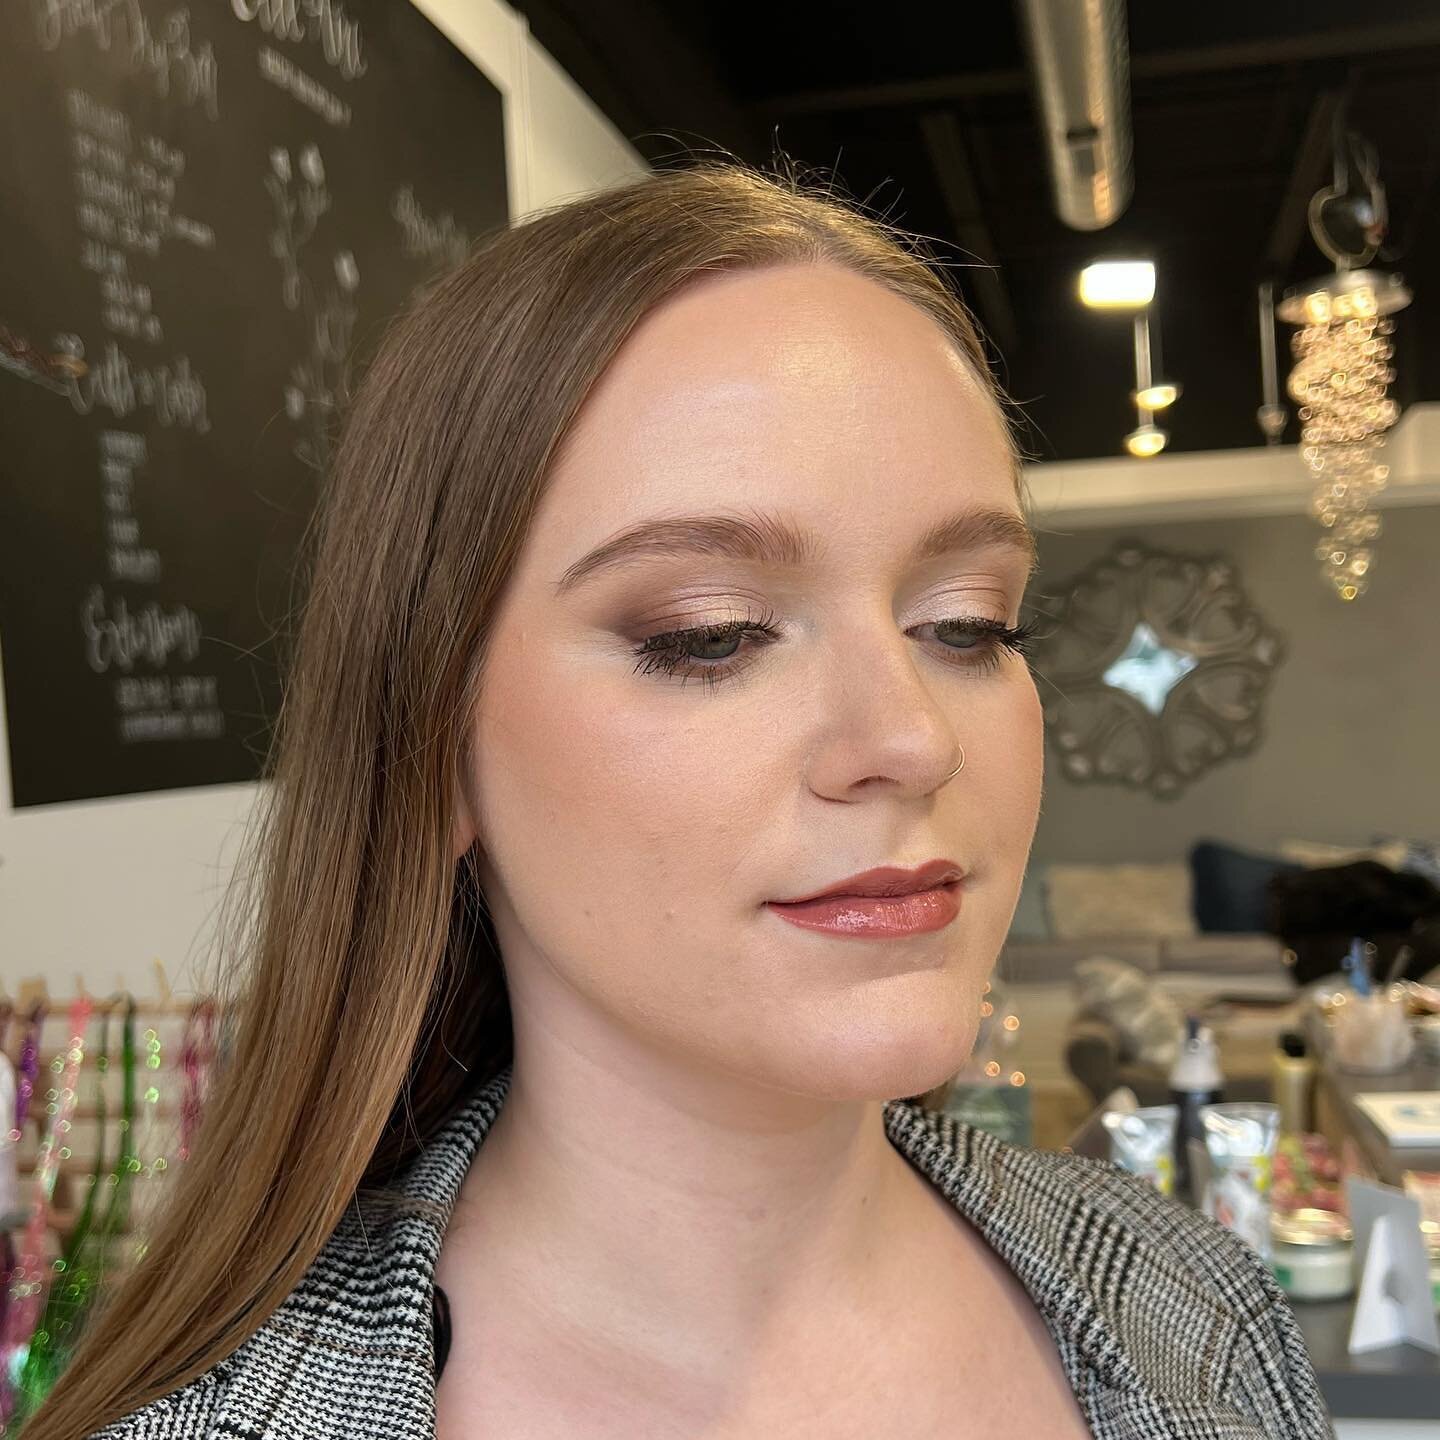 Soft glam for this beauty&rsquo;s wedding trial! 
Makeup: @the.beauty.inspirationist 
______________________________
Contact me at (716)341-0468 / DM / or email me at info@elleairebuffalo.com
______________________________
#thebeautyinspirationist #e